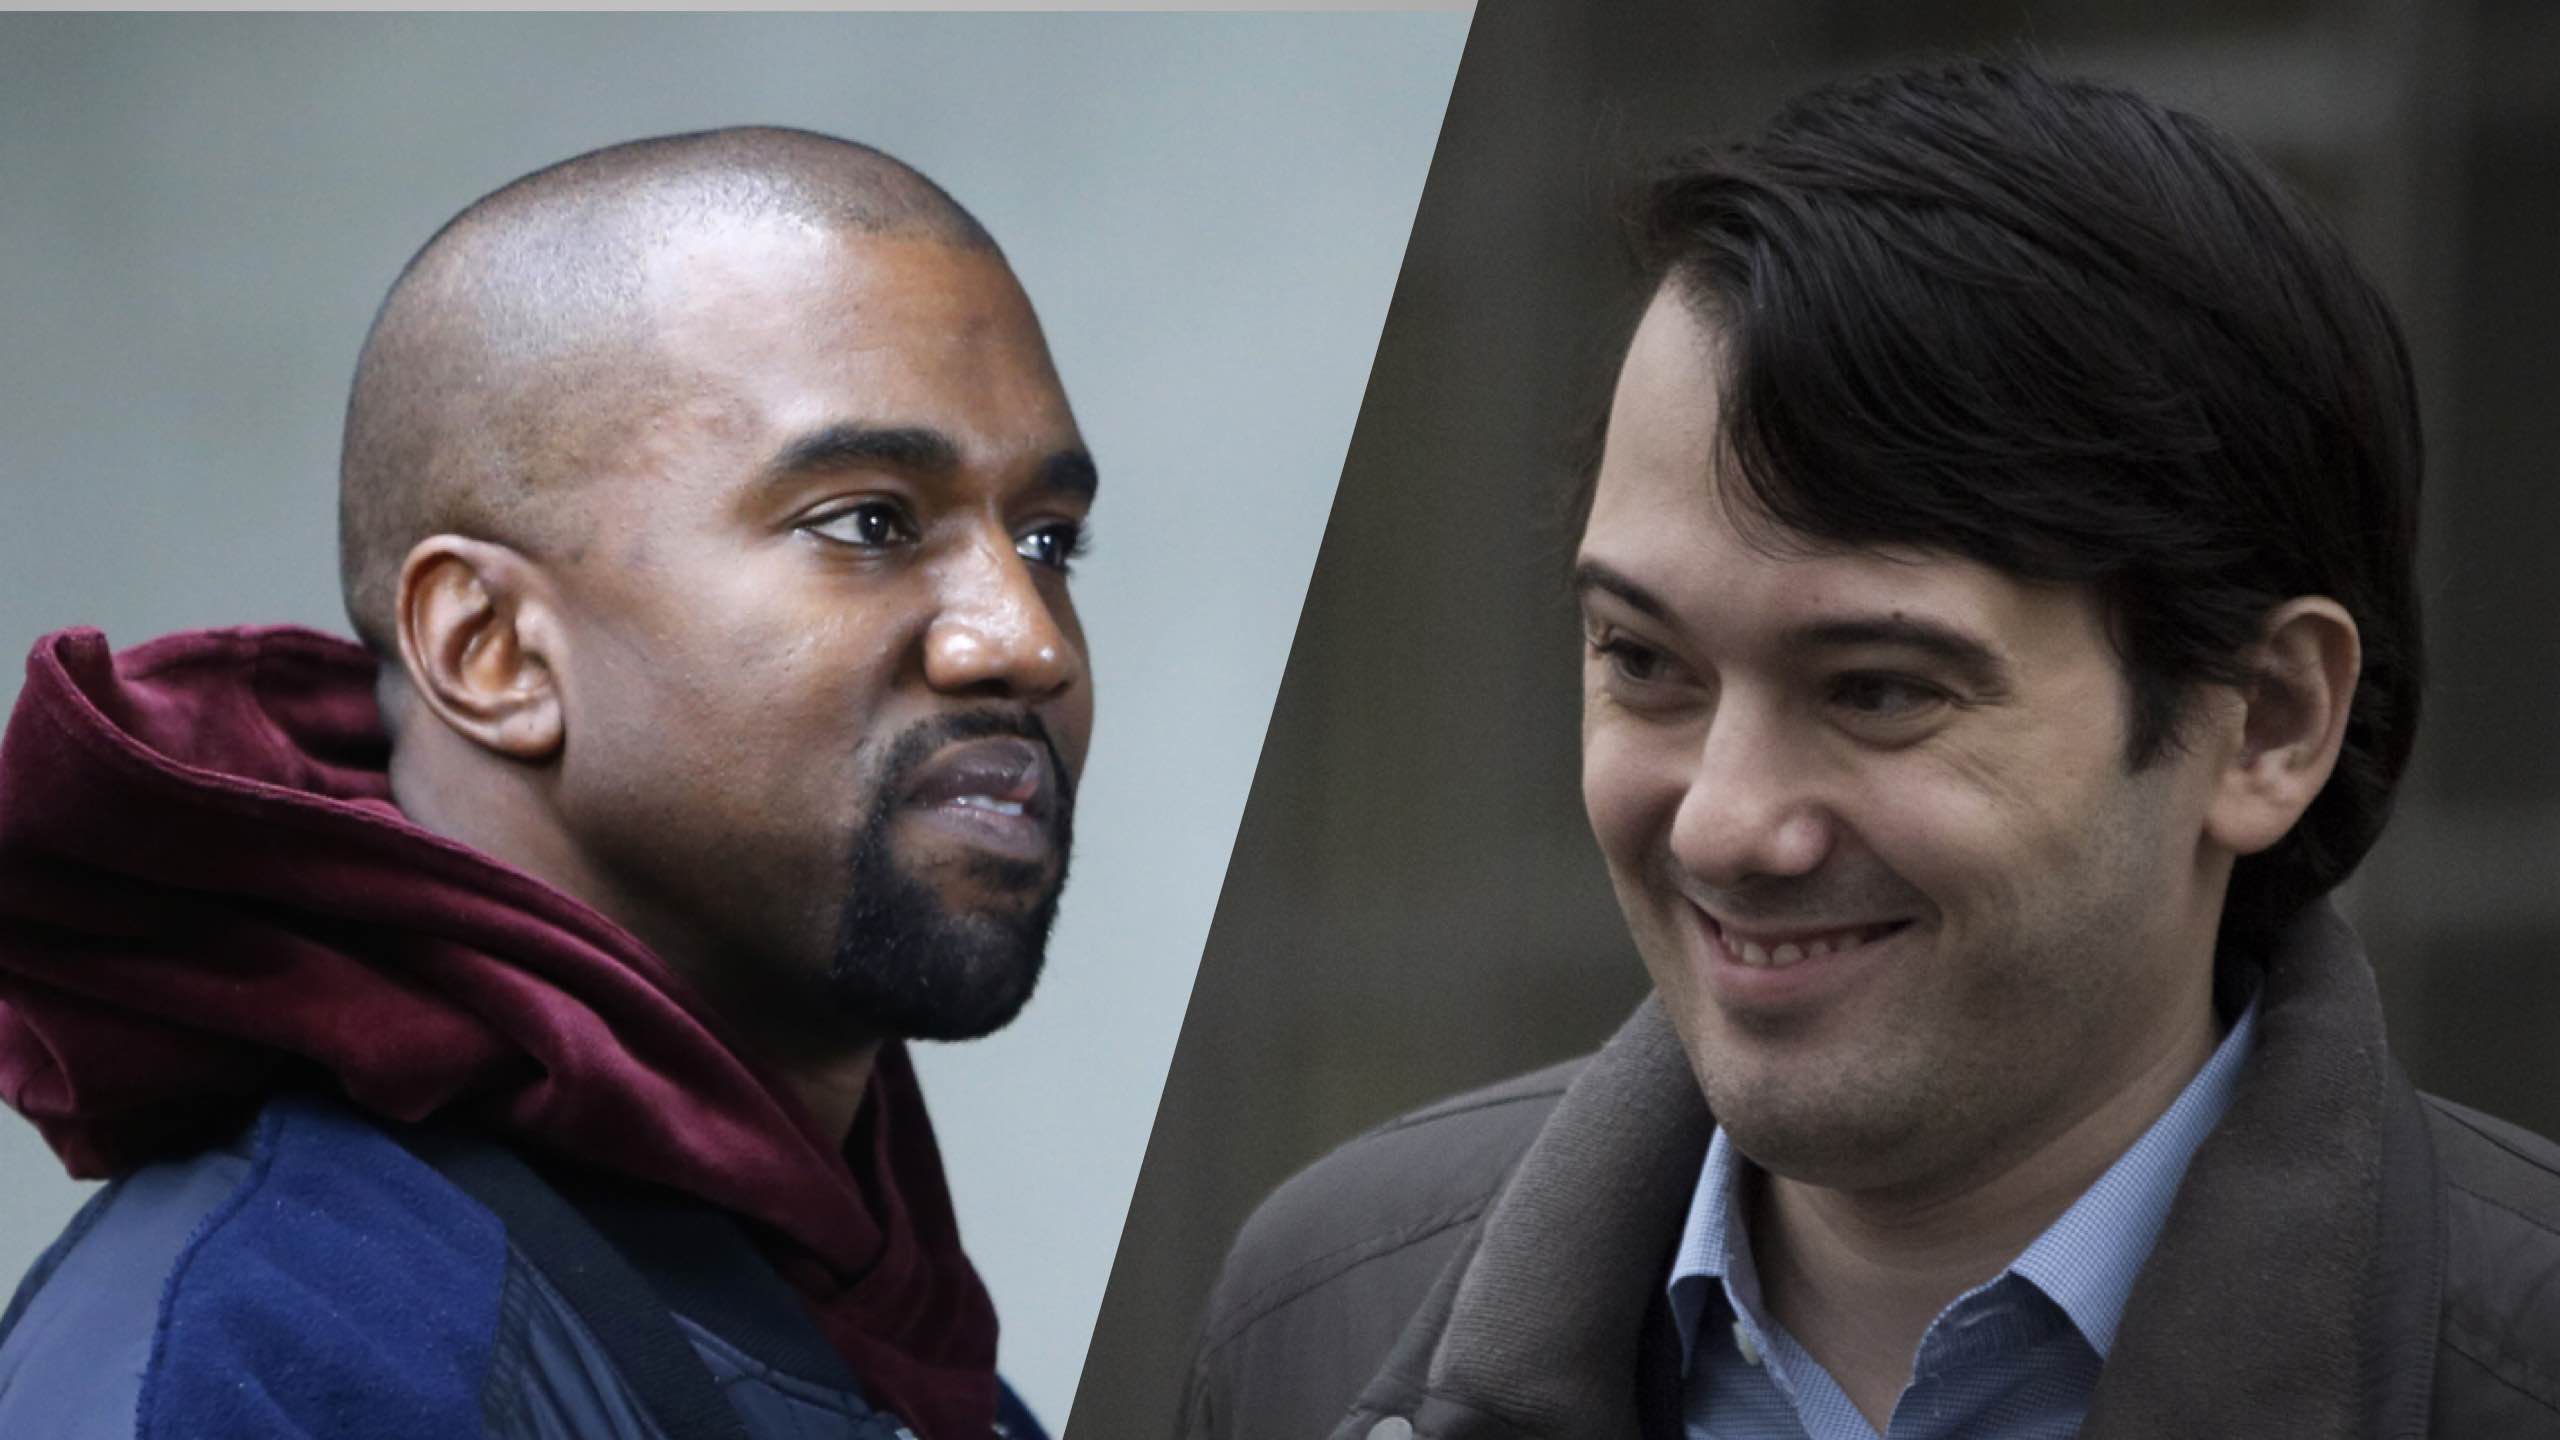 ‘Pharma bro’ Martin Shkreli offers to buy out Kanye West’s ‘The Life of Pablo’